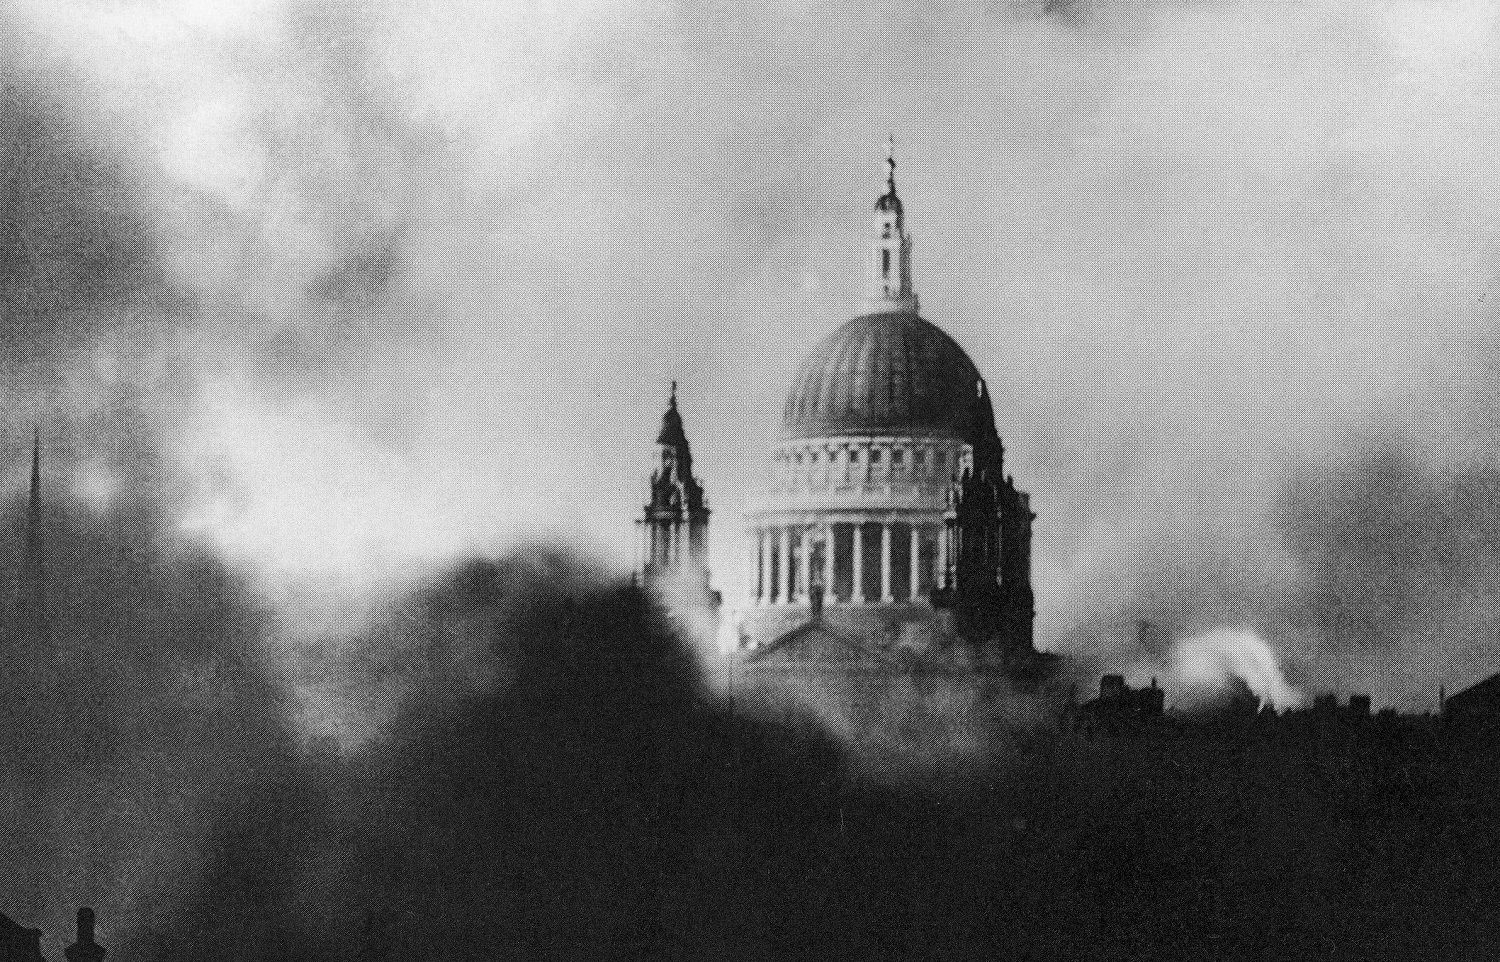 A photograph of St Paul's Cathedral dome surrounded by smoke with bombed out buildings in the foreground